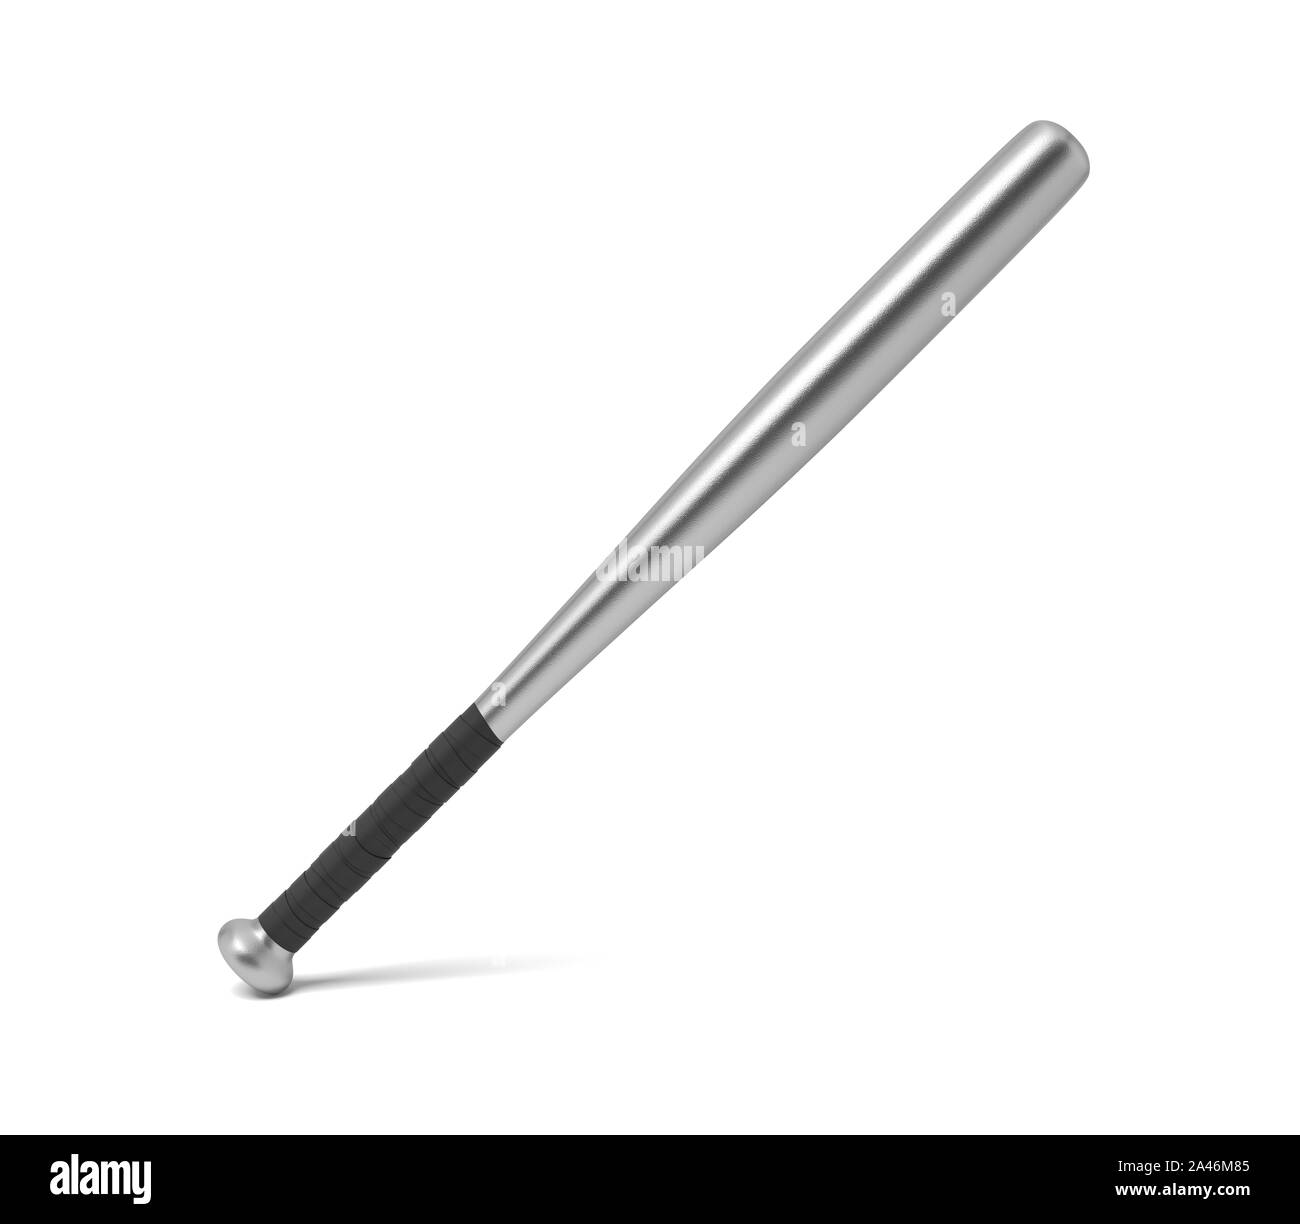 3d rendering of a single metal baseball bat with a wrapped handle standing  on a white background. Baseball equipment. Steel bat. Metal club Stock  Photo - Alamy